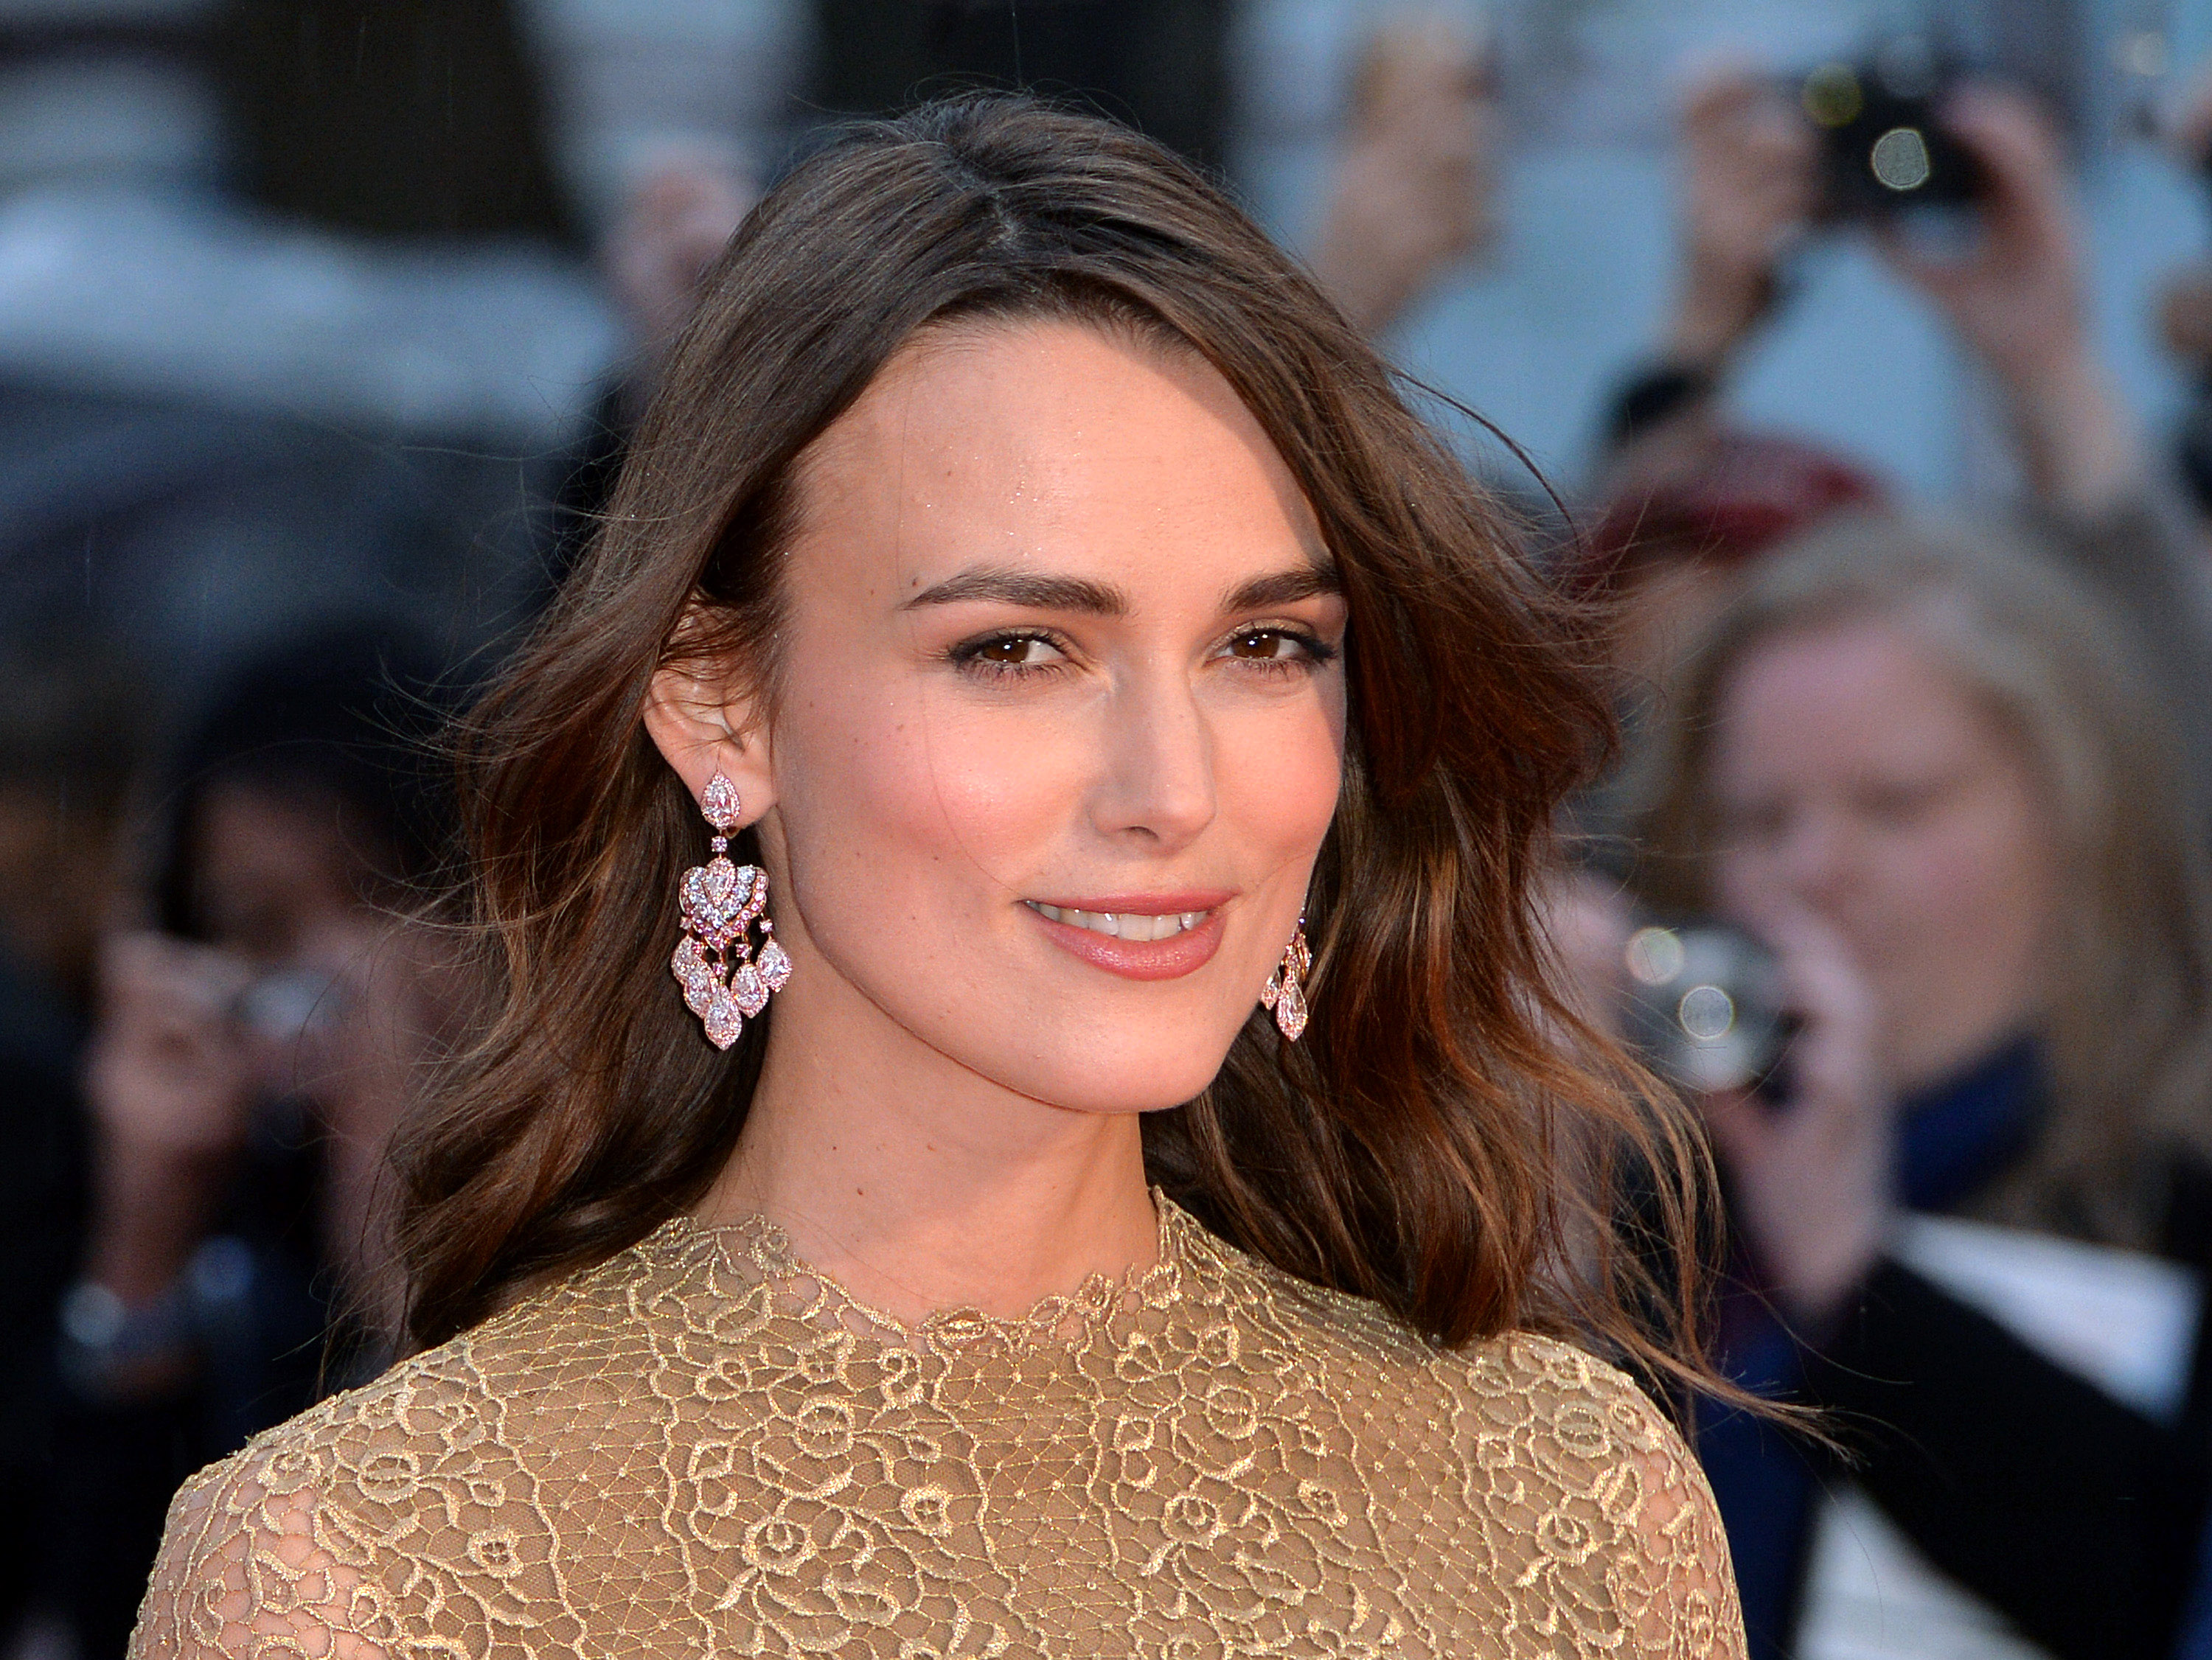 Keira Knightley Net Worth 5 Fast Facts You Need to Know